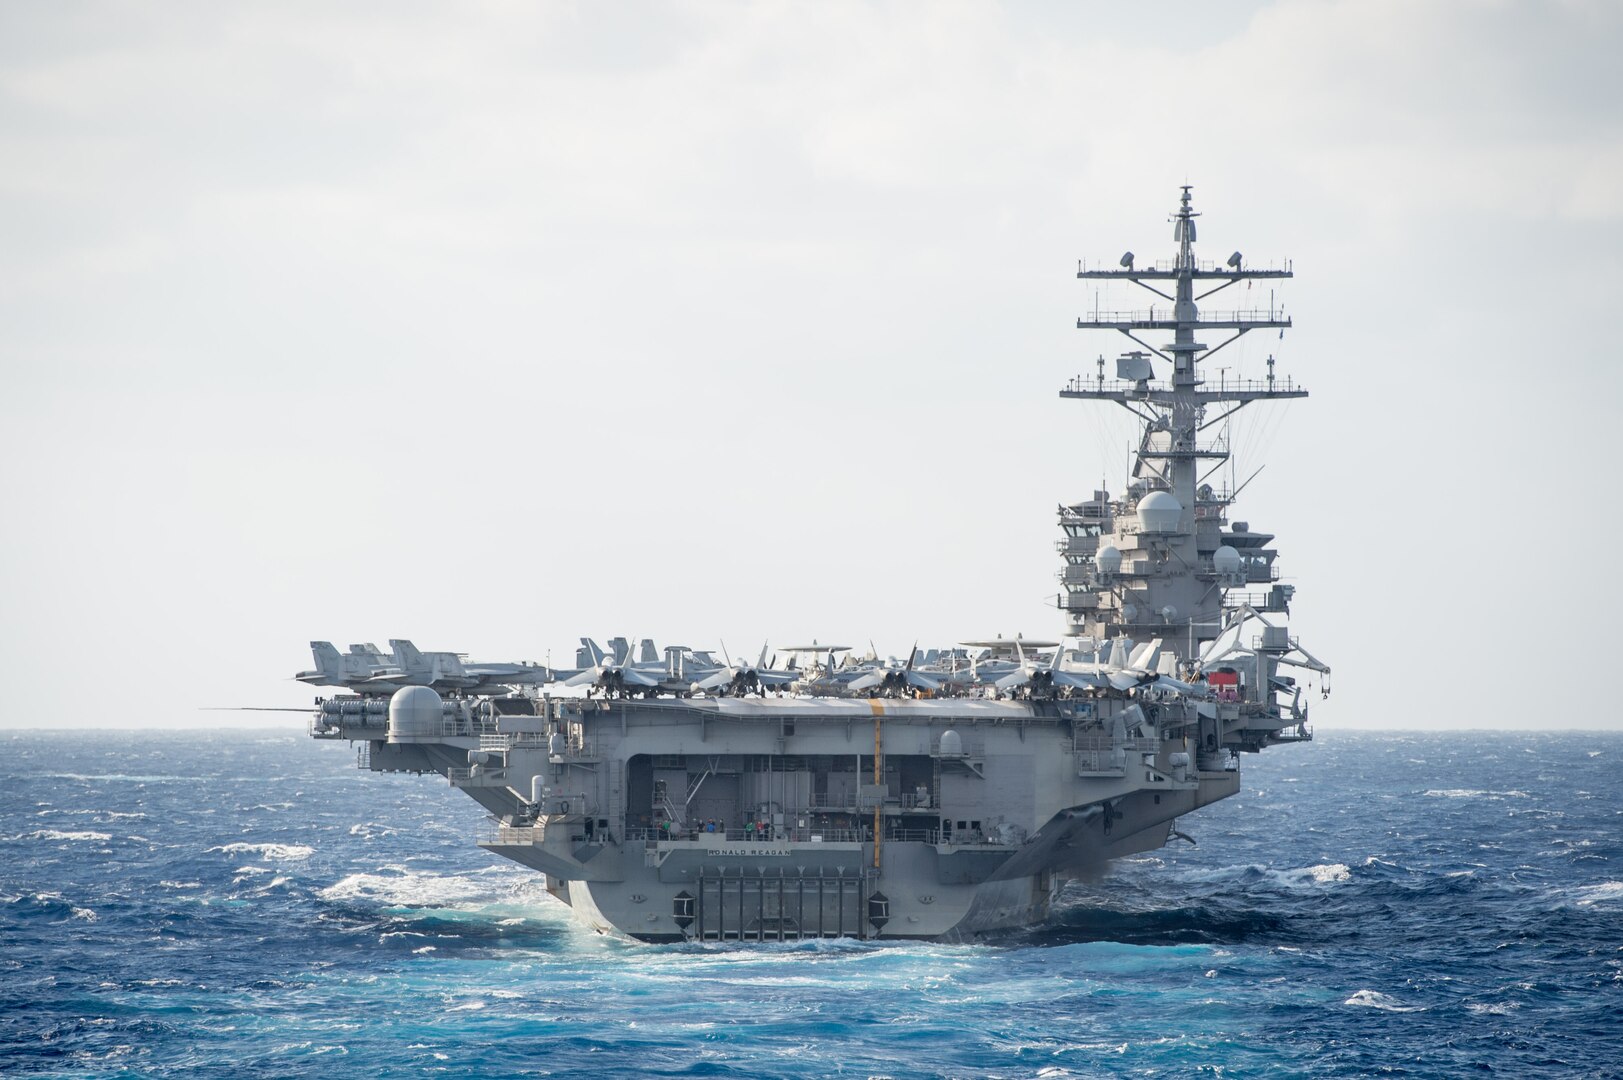 The Nimitz-class aircraft carrier USS Ronald Reagan (CVN 76) steams in formation during a photo exercise (PHOTOEX) to conclude Keen Sword 17 (KS17), Nov. 11, 2016.  KS17 is a biennial, Chairman of the Joint Chiefs of Staff-directed, U.S. Pacific Command-sponsored Field Training Exercise (FTX). KS17 is designed to meet mutual defense objectives by increasing combat readiness and interoperability between Japan Self-Defense Forces (JSDF) and U.S. Forces. Ronald Reagan is leading the Carrier Strike Group Five (CSG 5) patrol in the Philippine Sea supporting security and stability in the Indo-Asia-Pacific region.